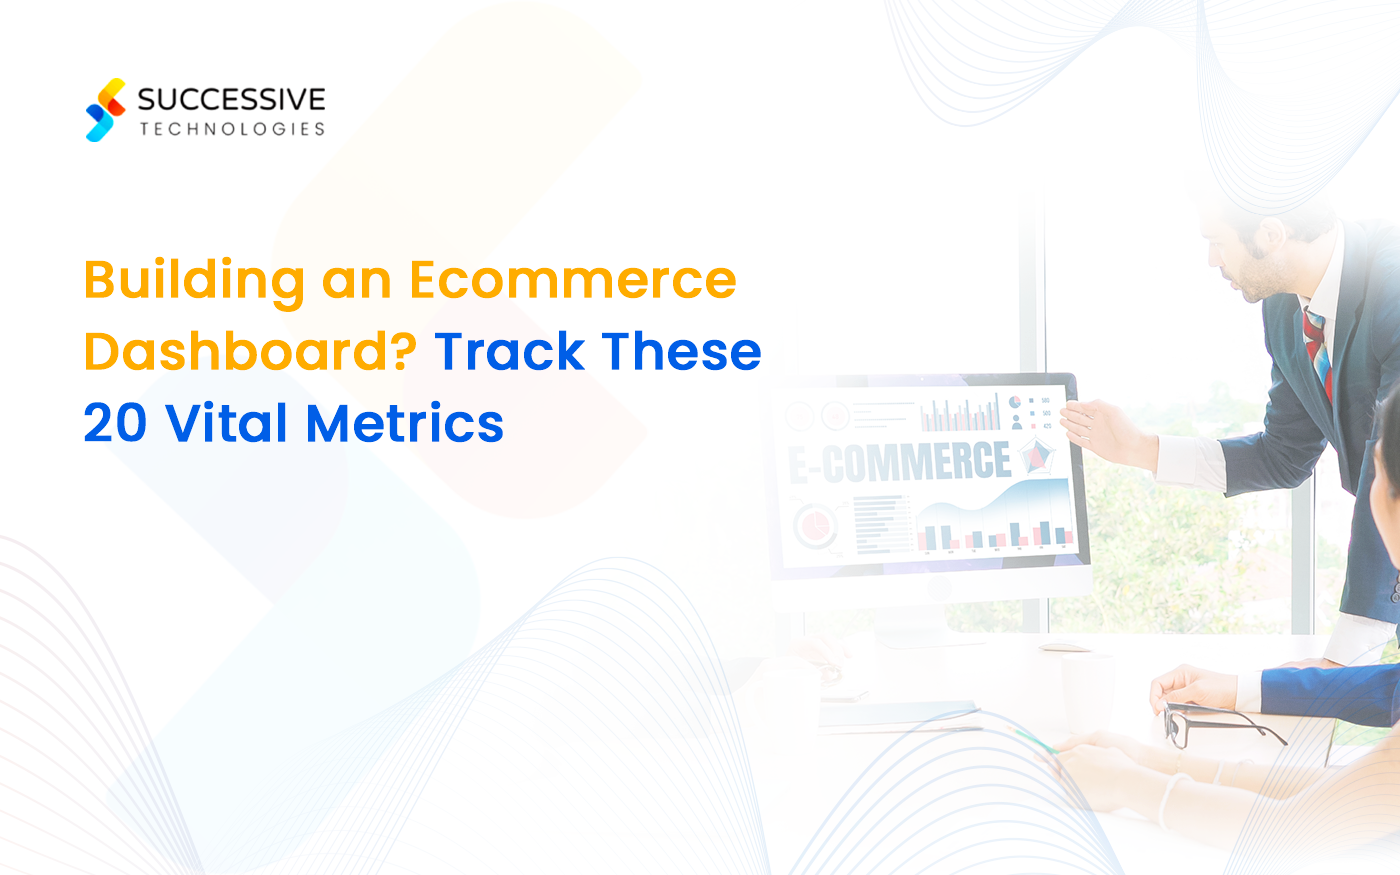 Building an Ecommerce Dashboard? Track These 20 Vital Metrics